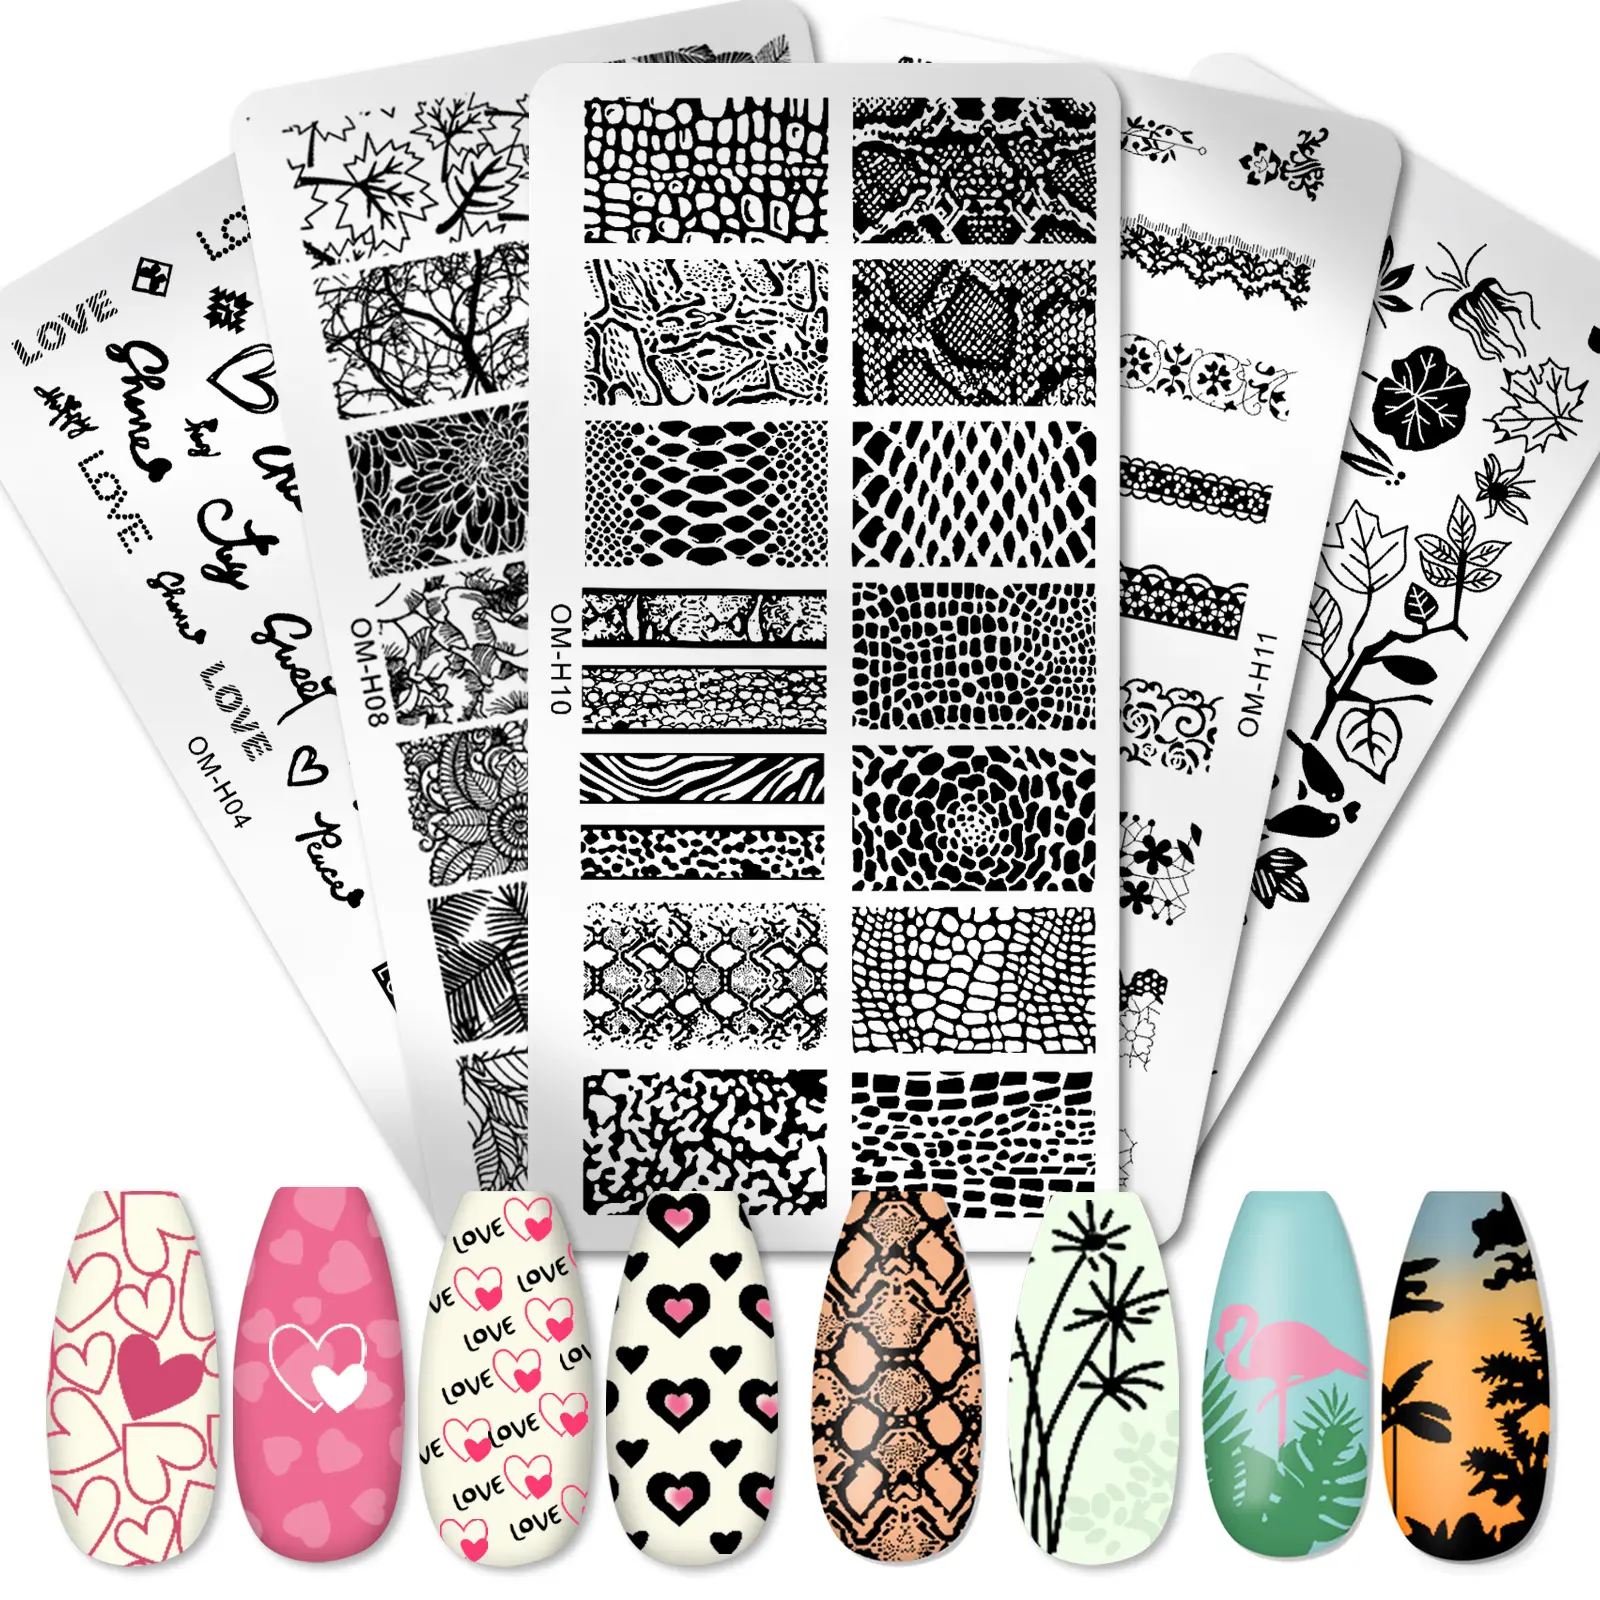 2022 DIY Nail Beauty Design Nail Art stamp plate Stainless Metal nail Stamping Plate